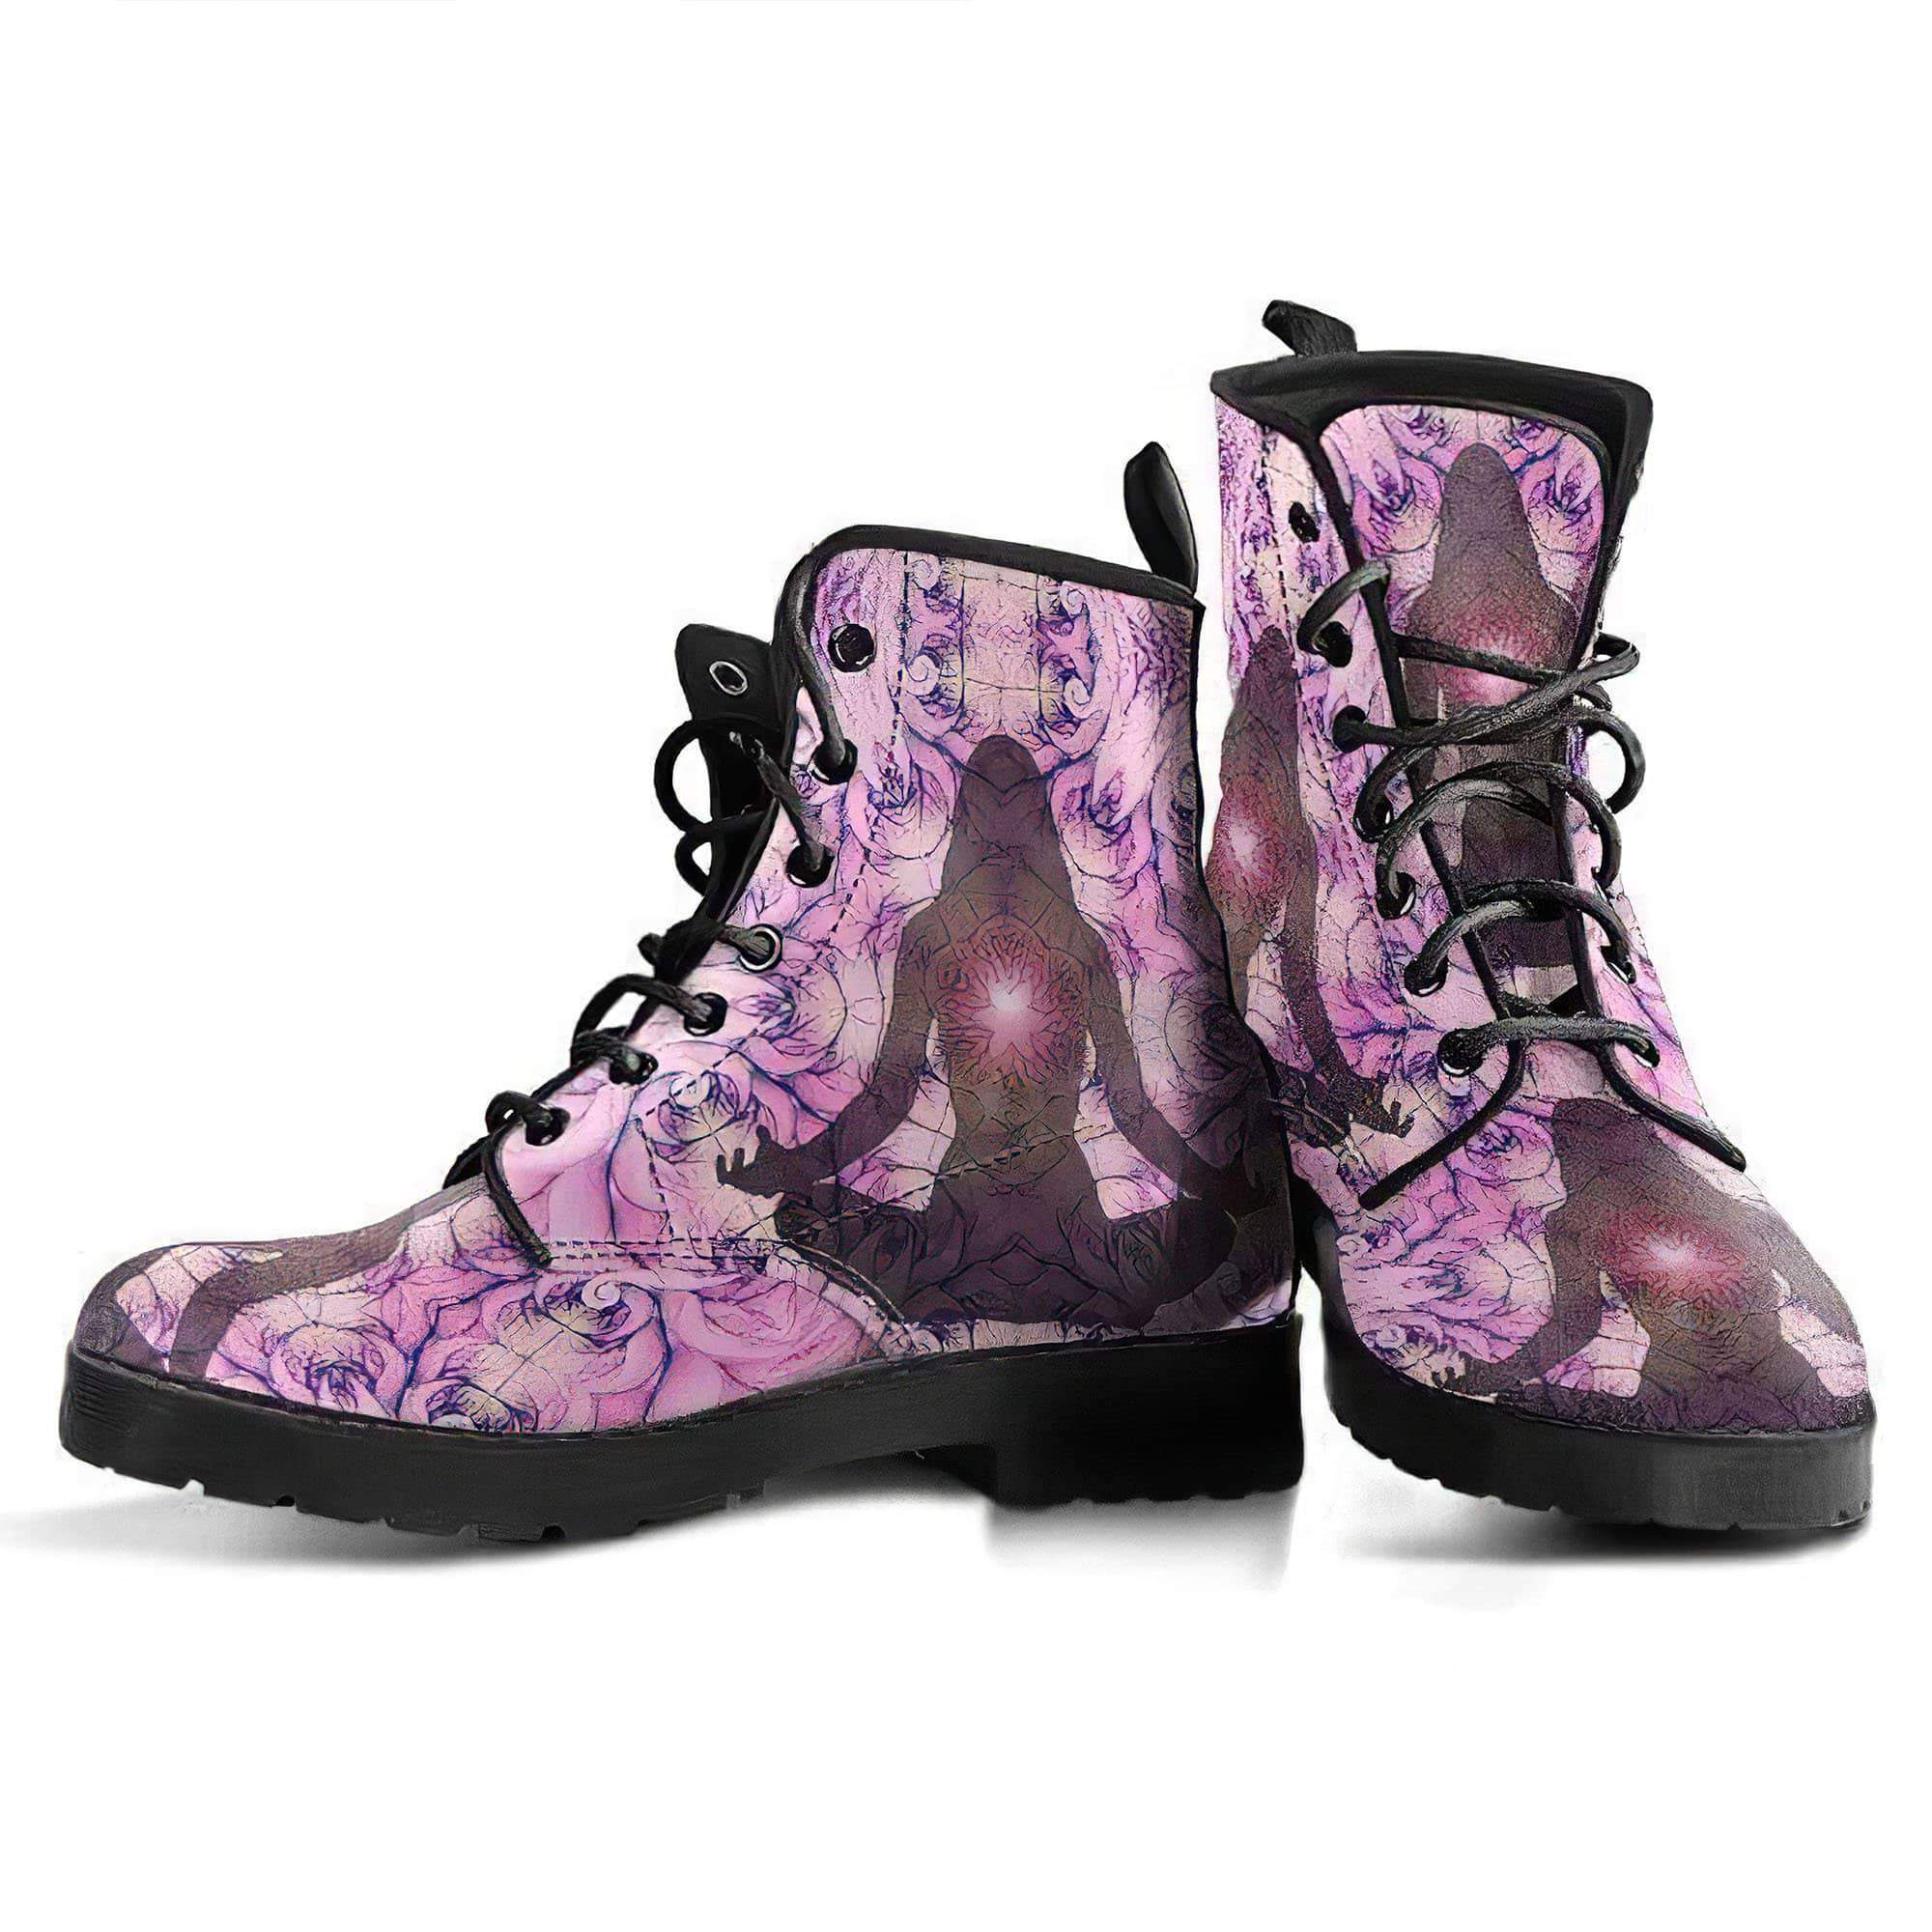 yoga-mandala-handcrafted-boots-women-s-leather-boots-12051986972733.jpg